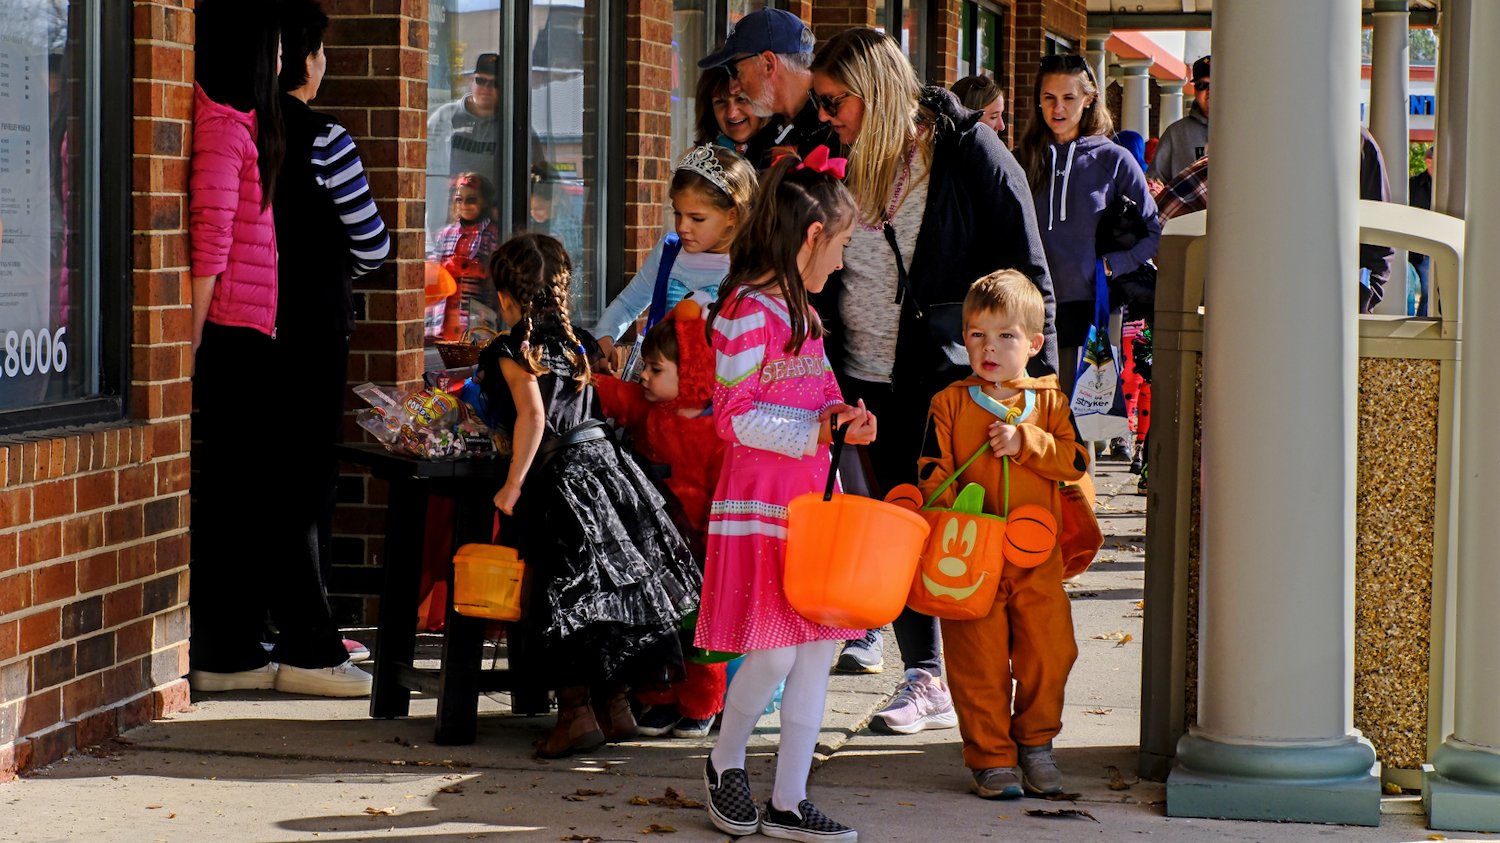 Trick-or-treaters filling their treat bags and buckets.